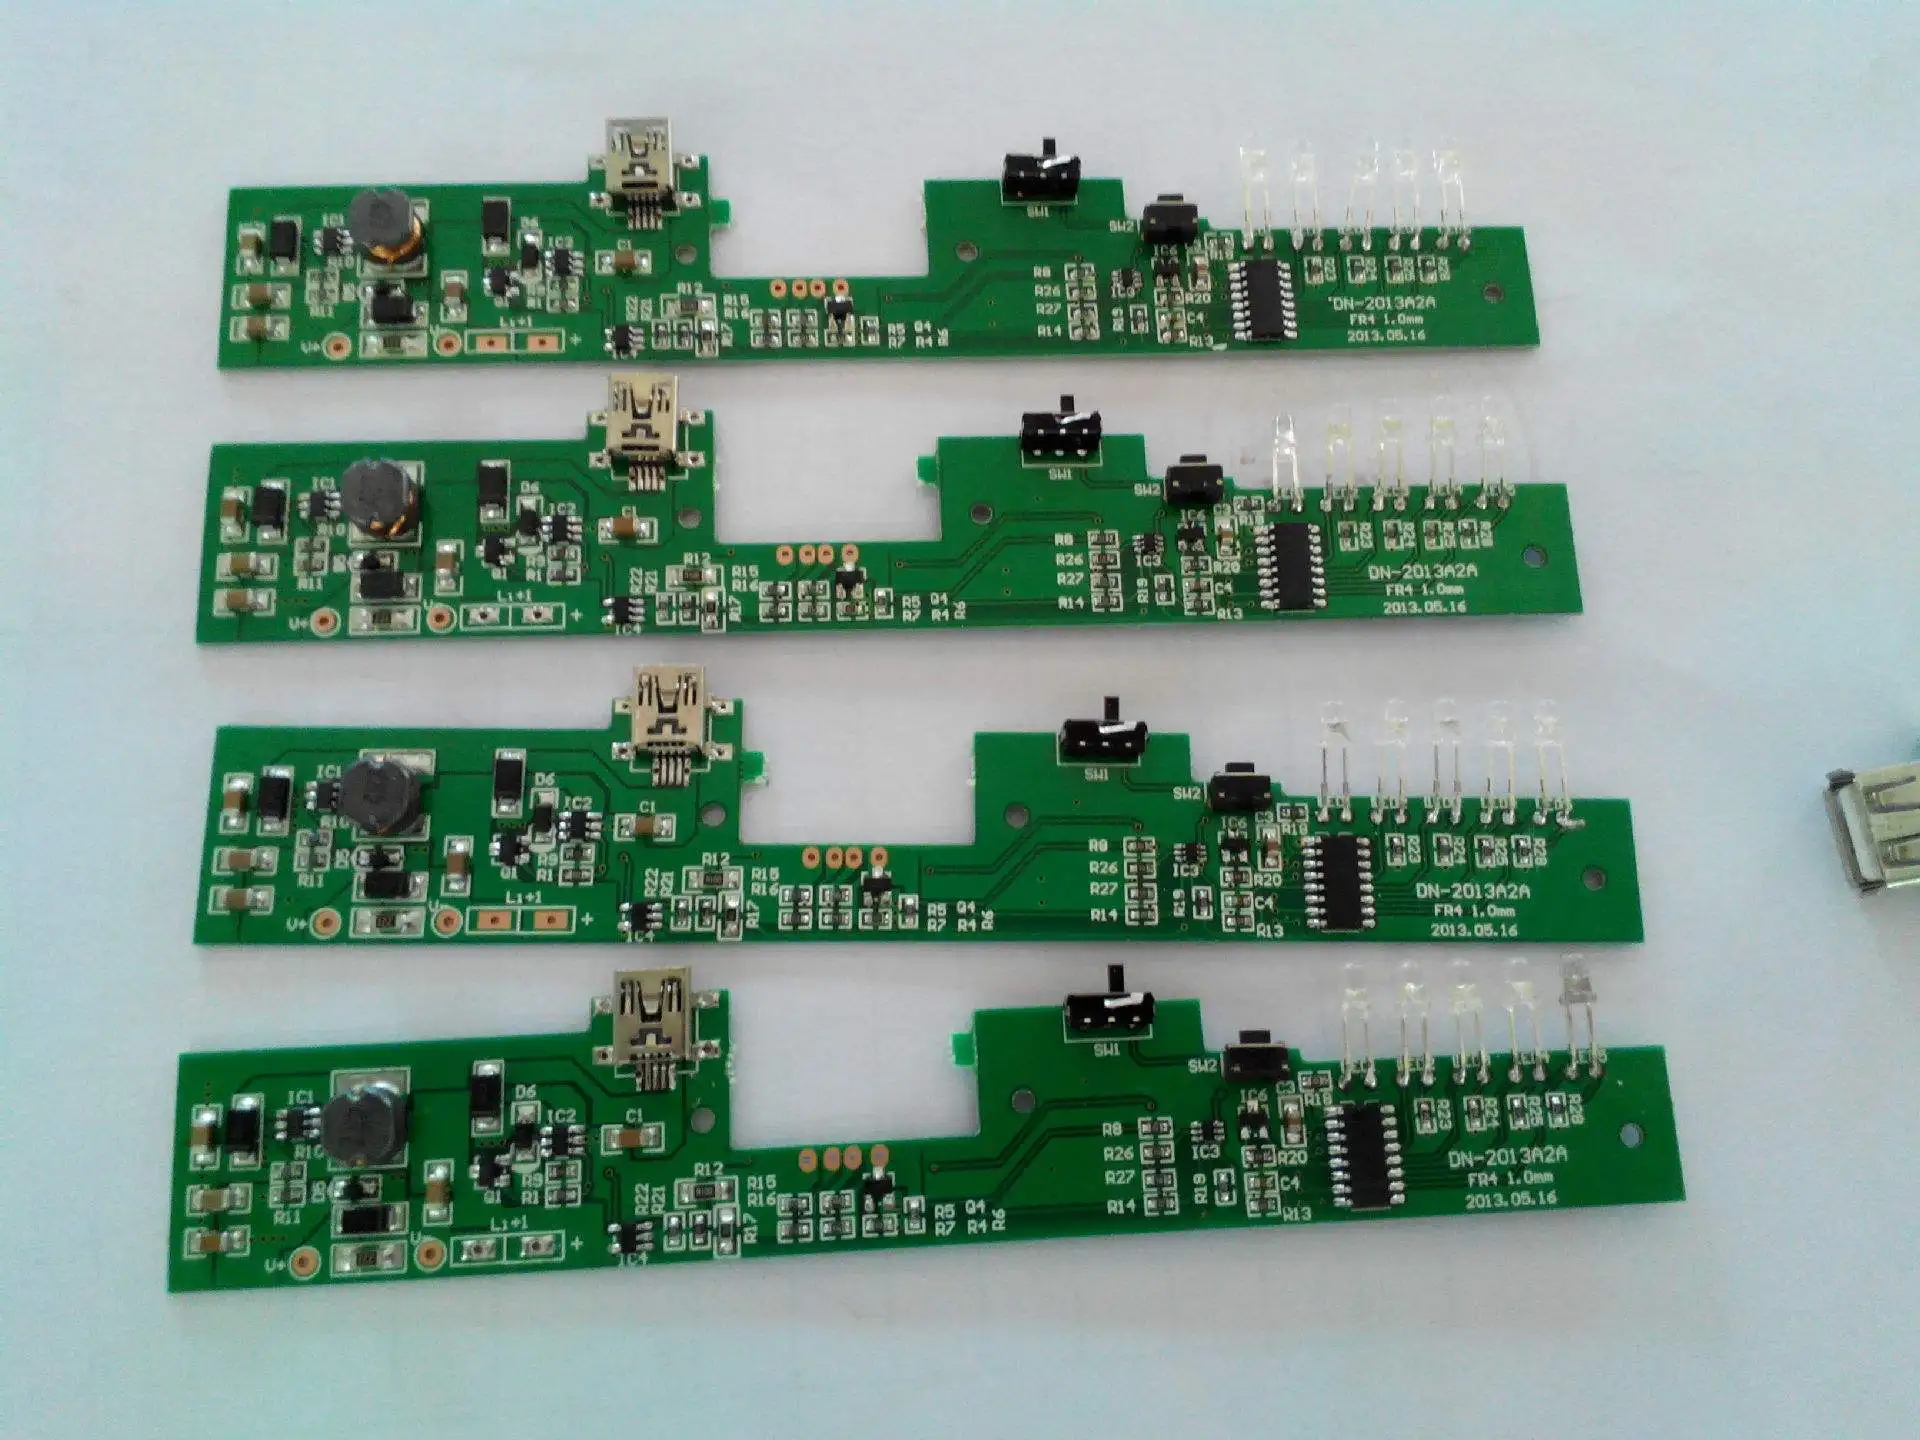 

From pcb design service layout copy sample bare board produce.assembly.purchase component one-stop 0402 0201 Capacitive